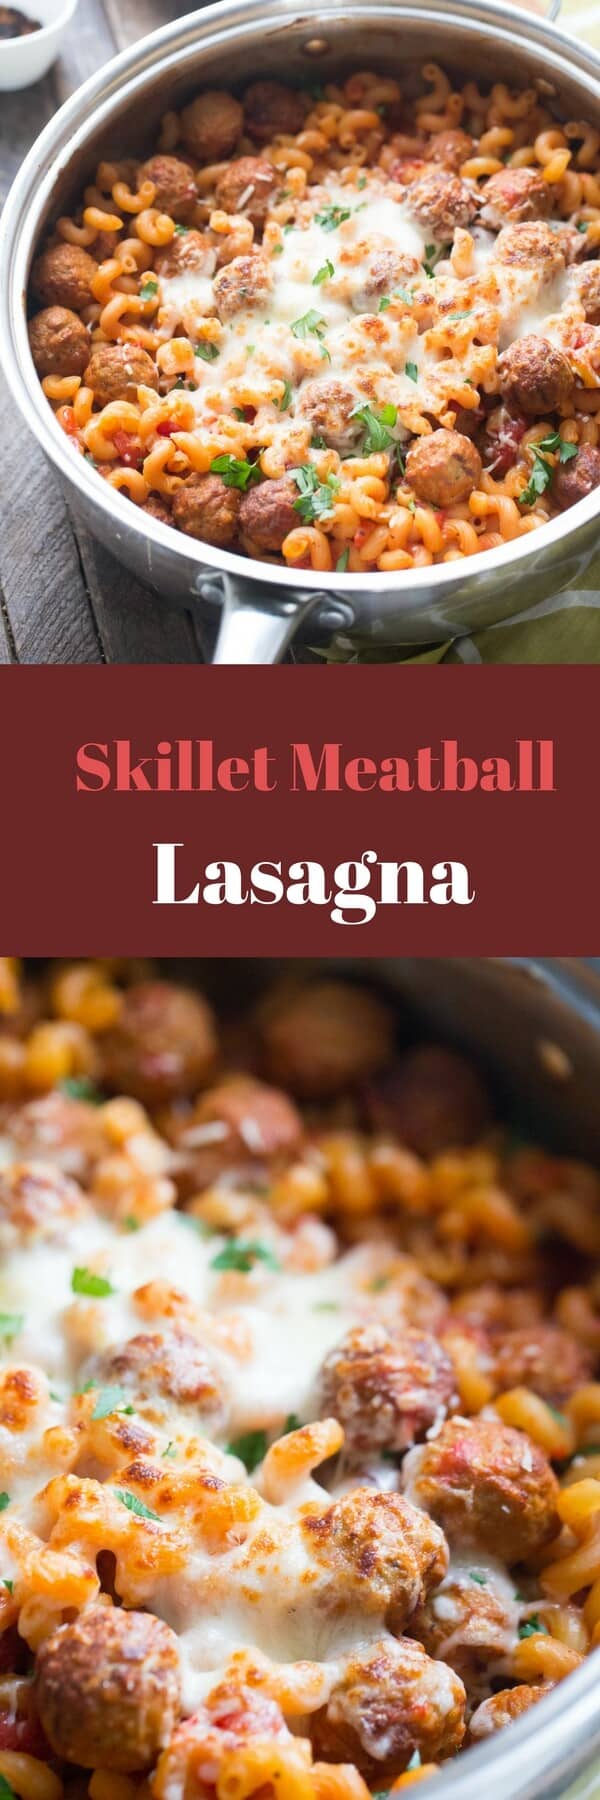 This meatball lasagna is the perfect recipe for those busy days! Simple ingredients make this meal a breeze without sacrificing any flavor!